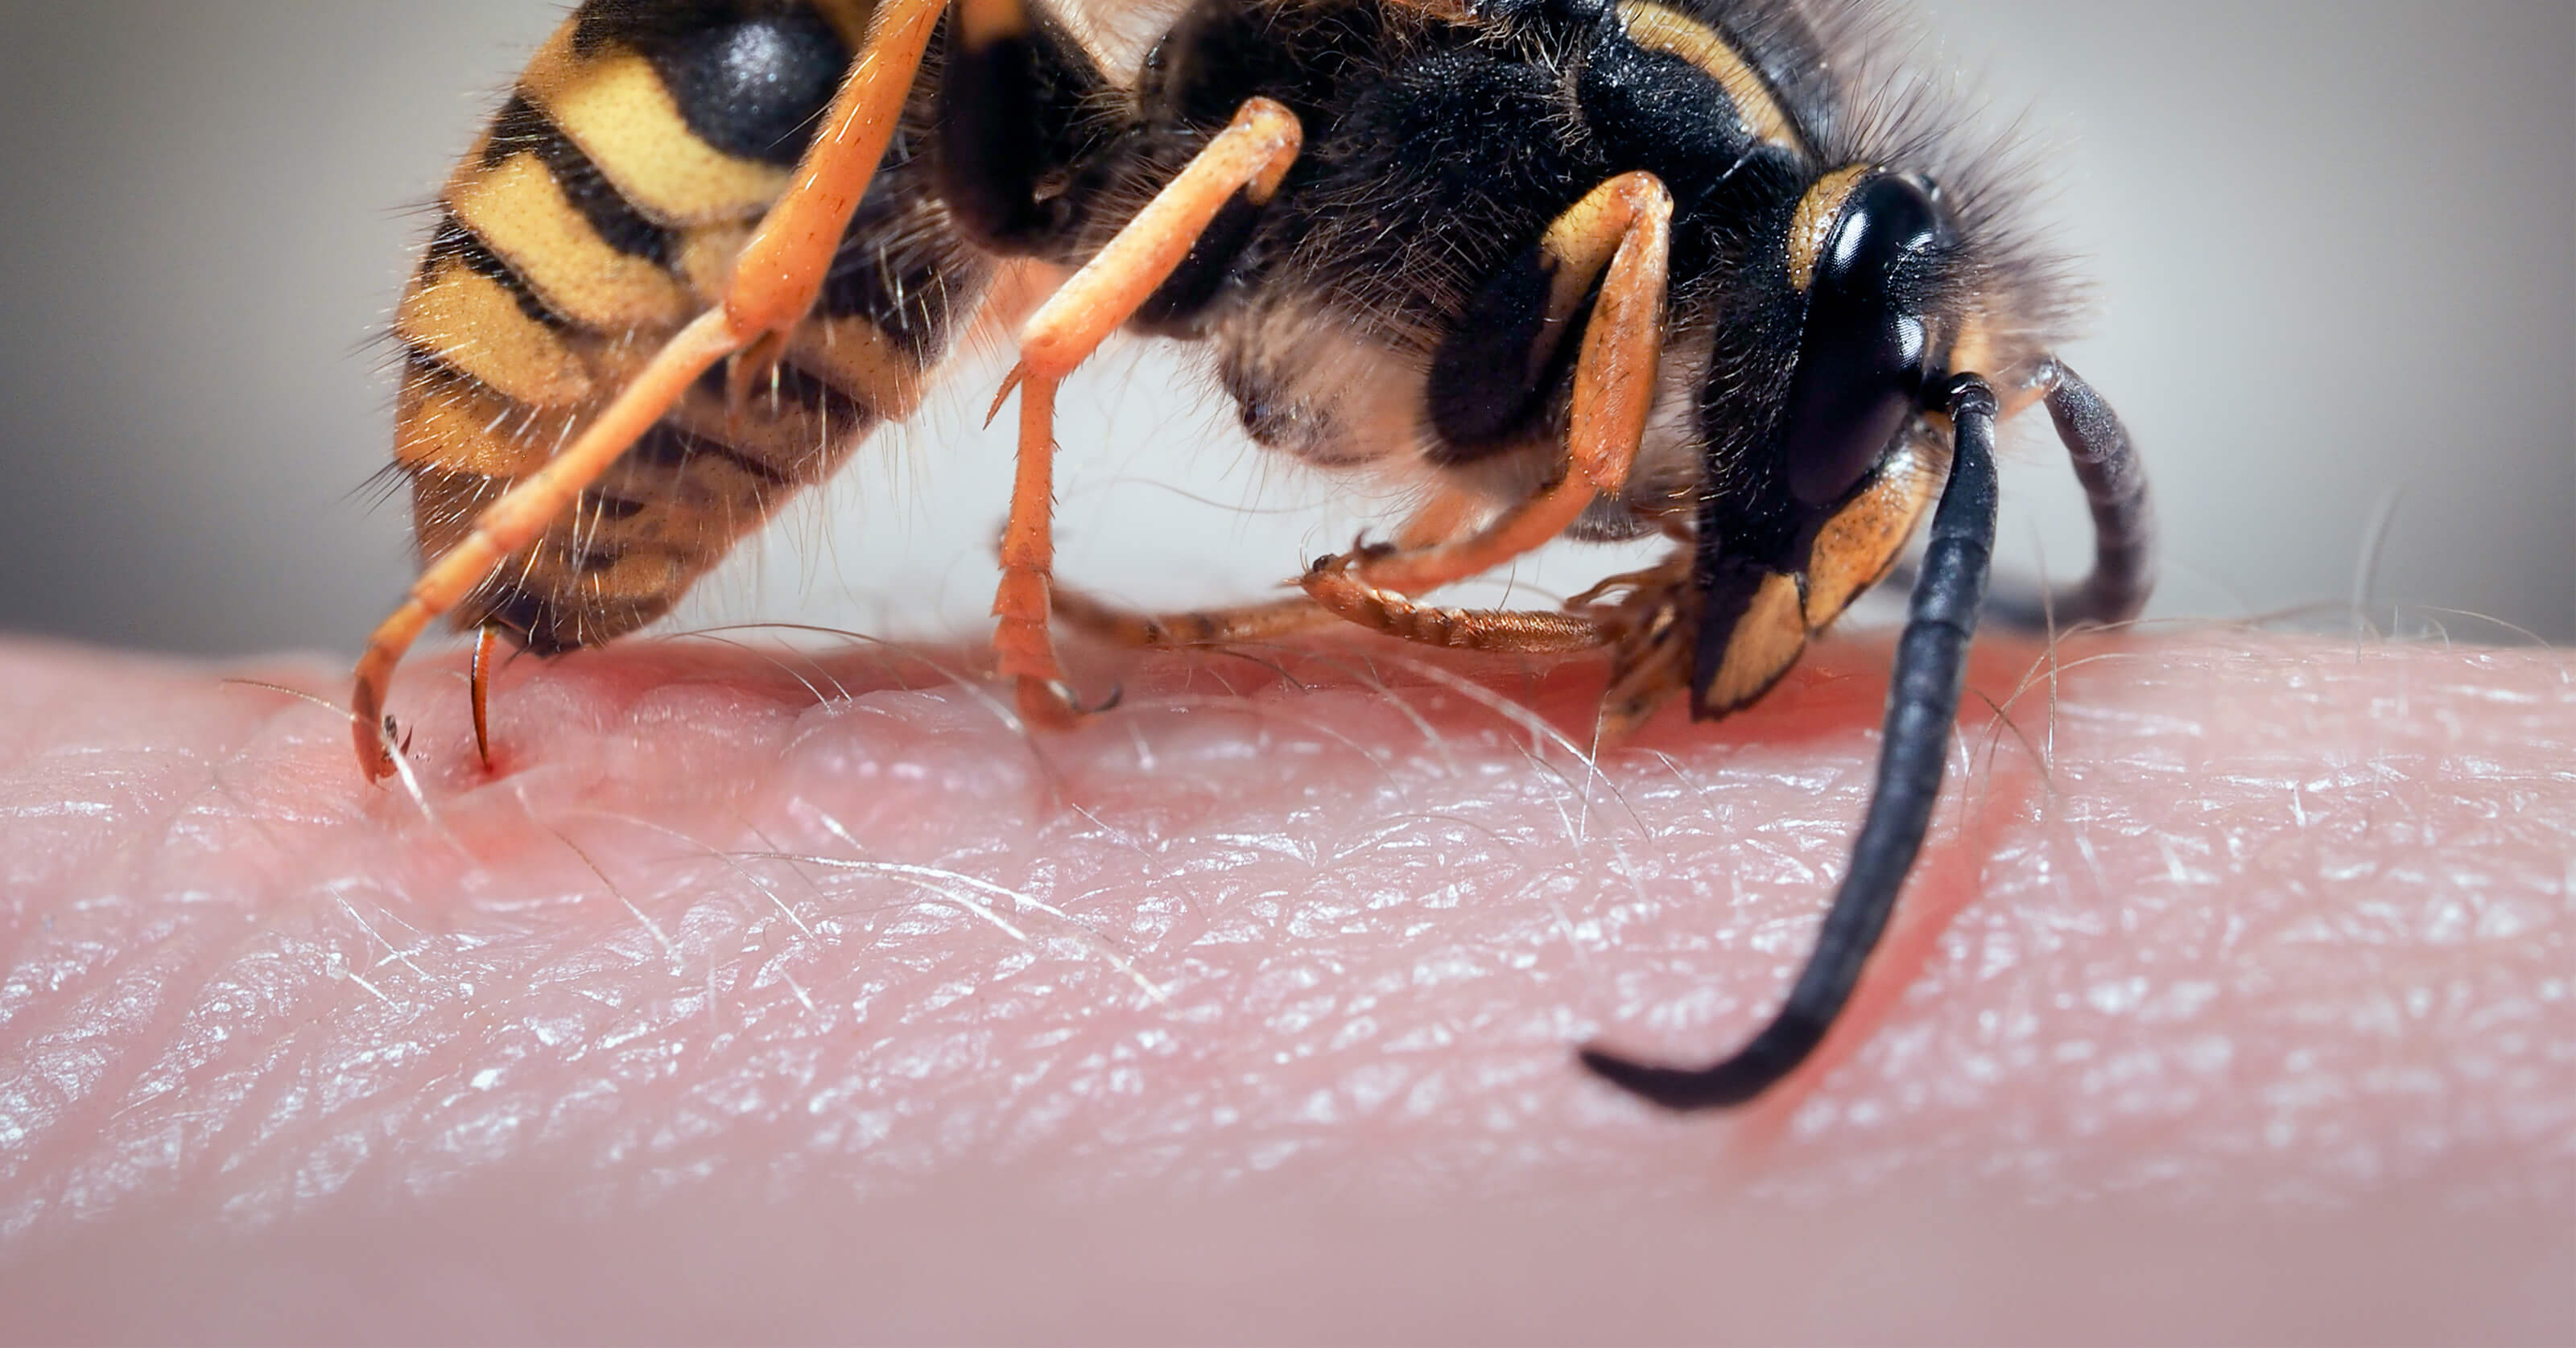 The World’s Most Painful Insect Bites